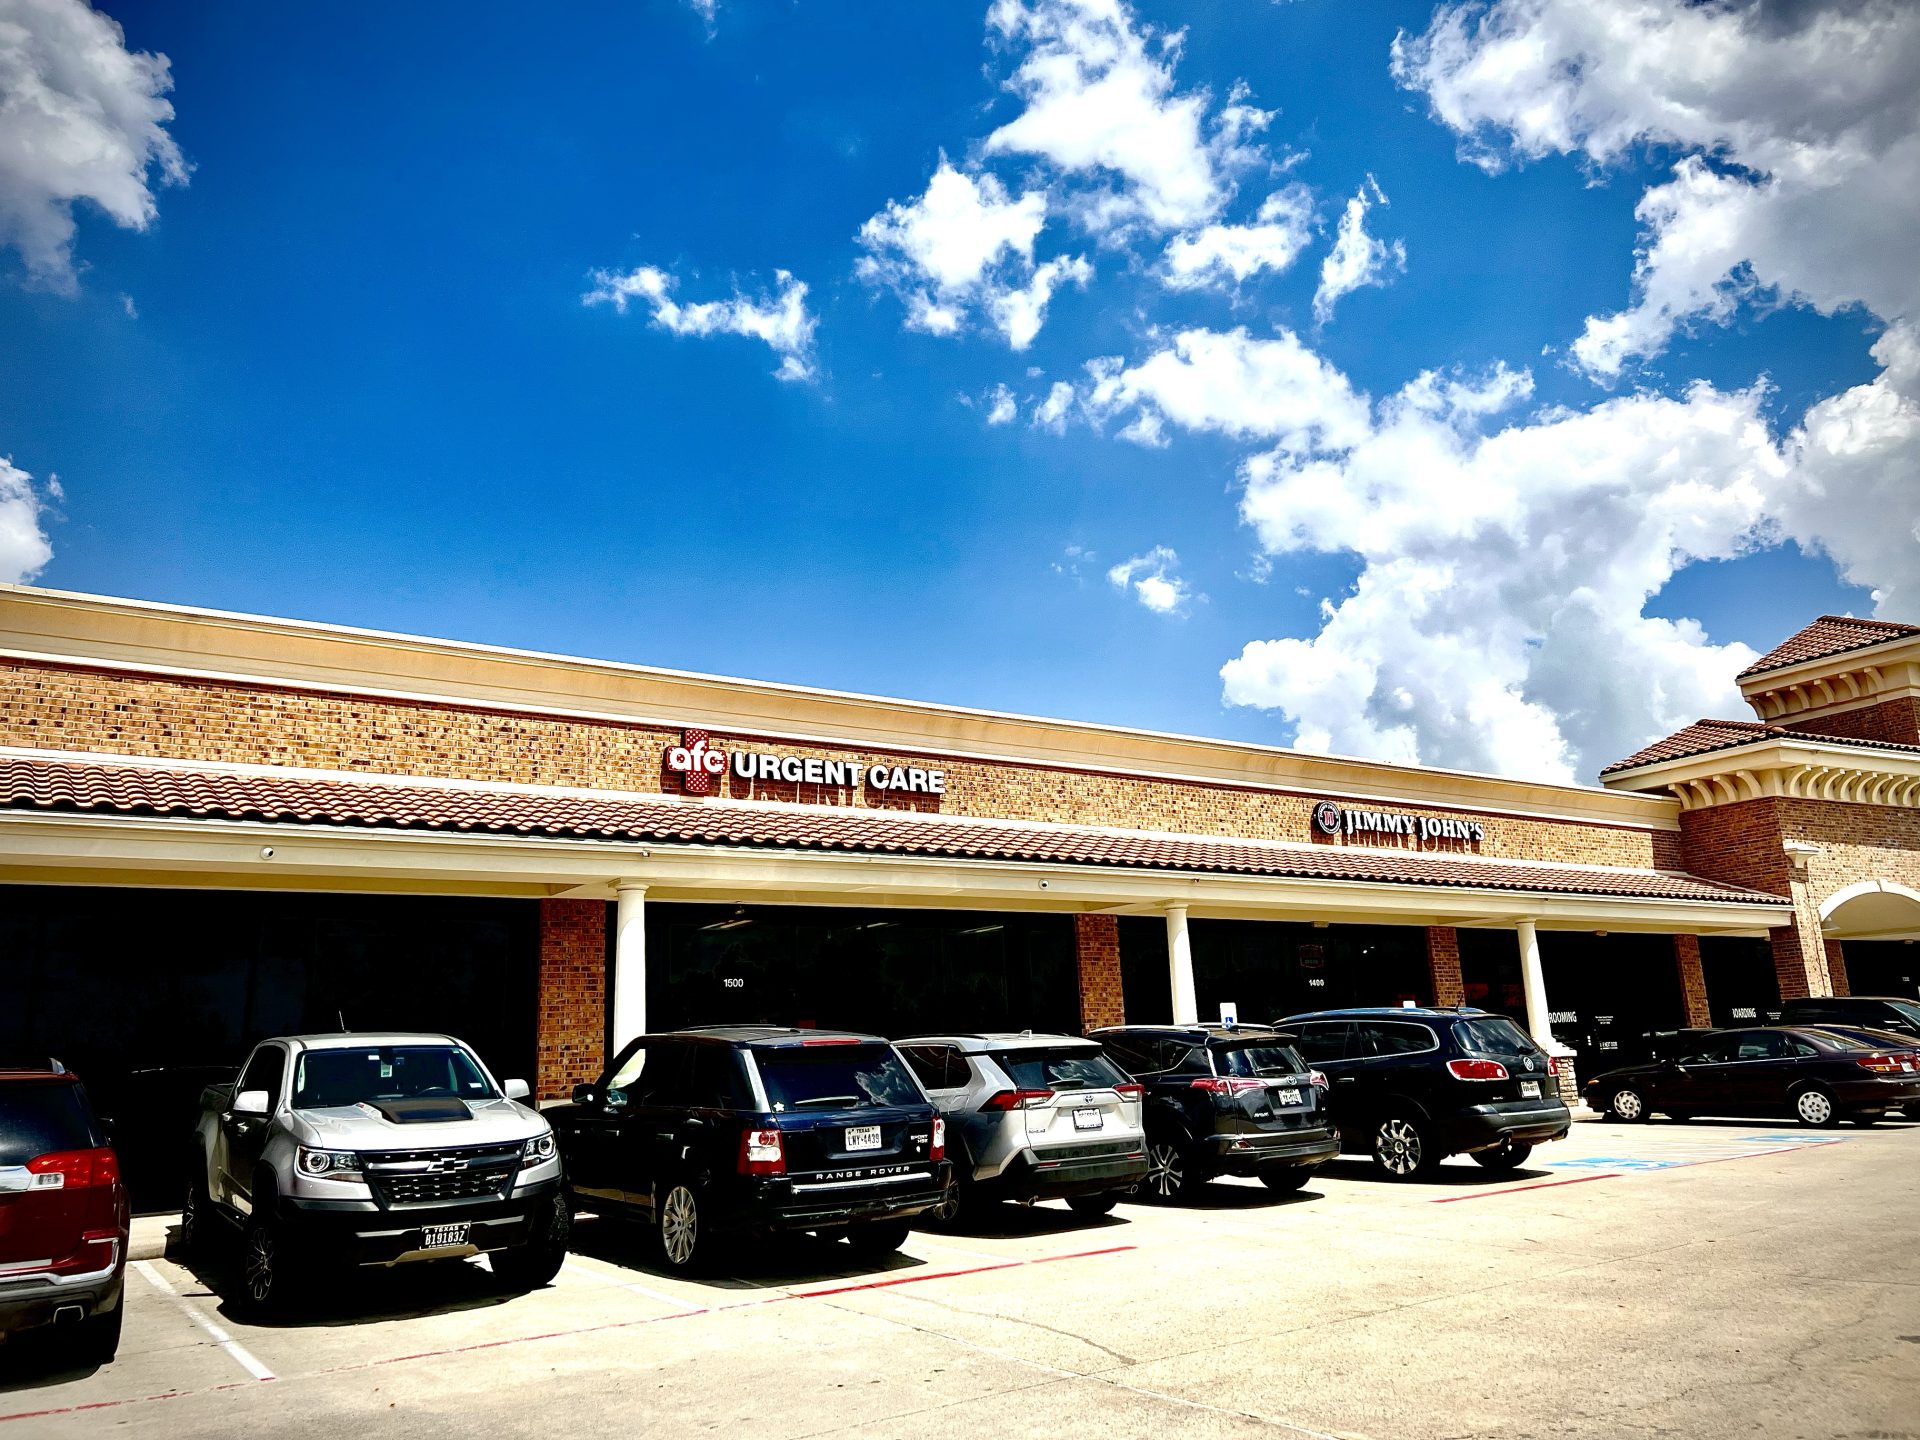 Visit our urgent care center in Houston, TX